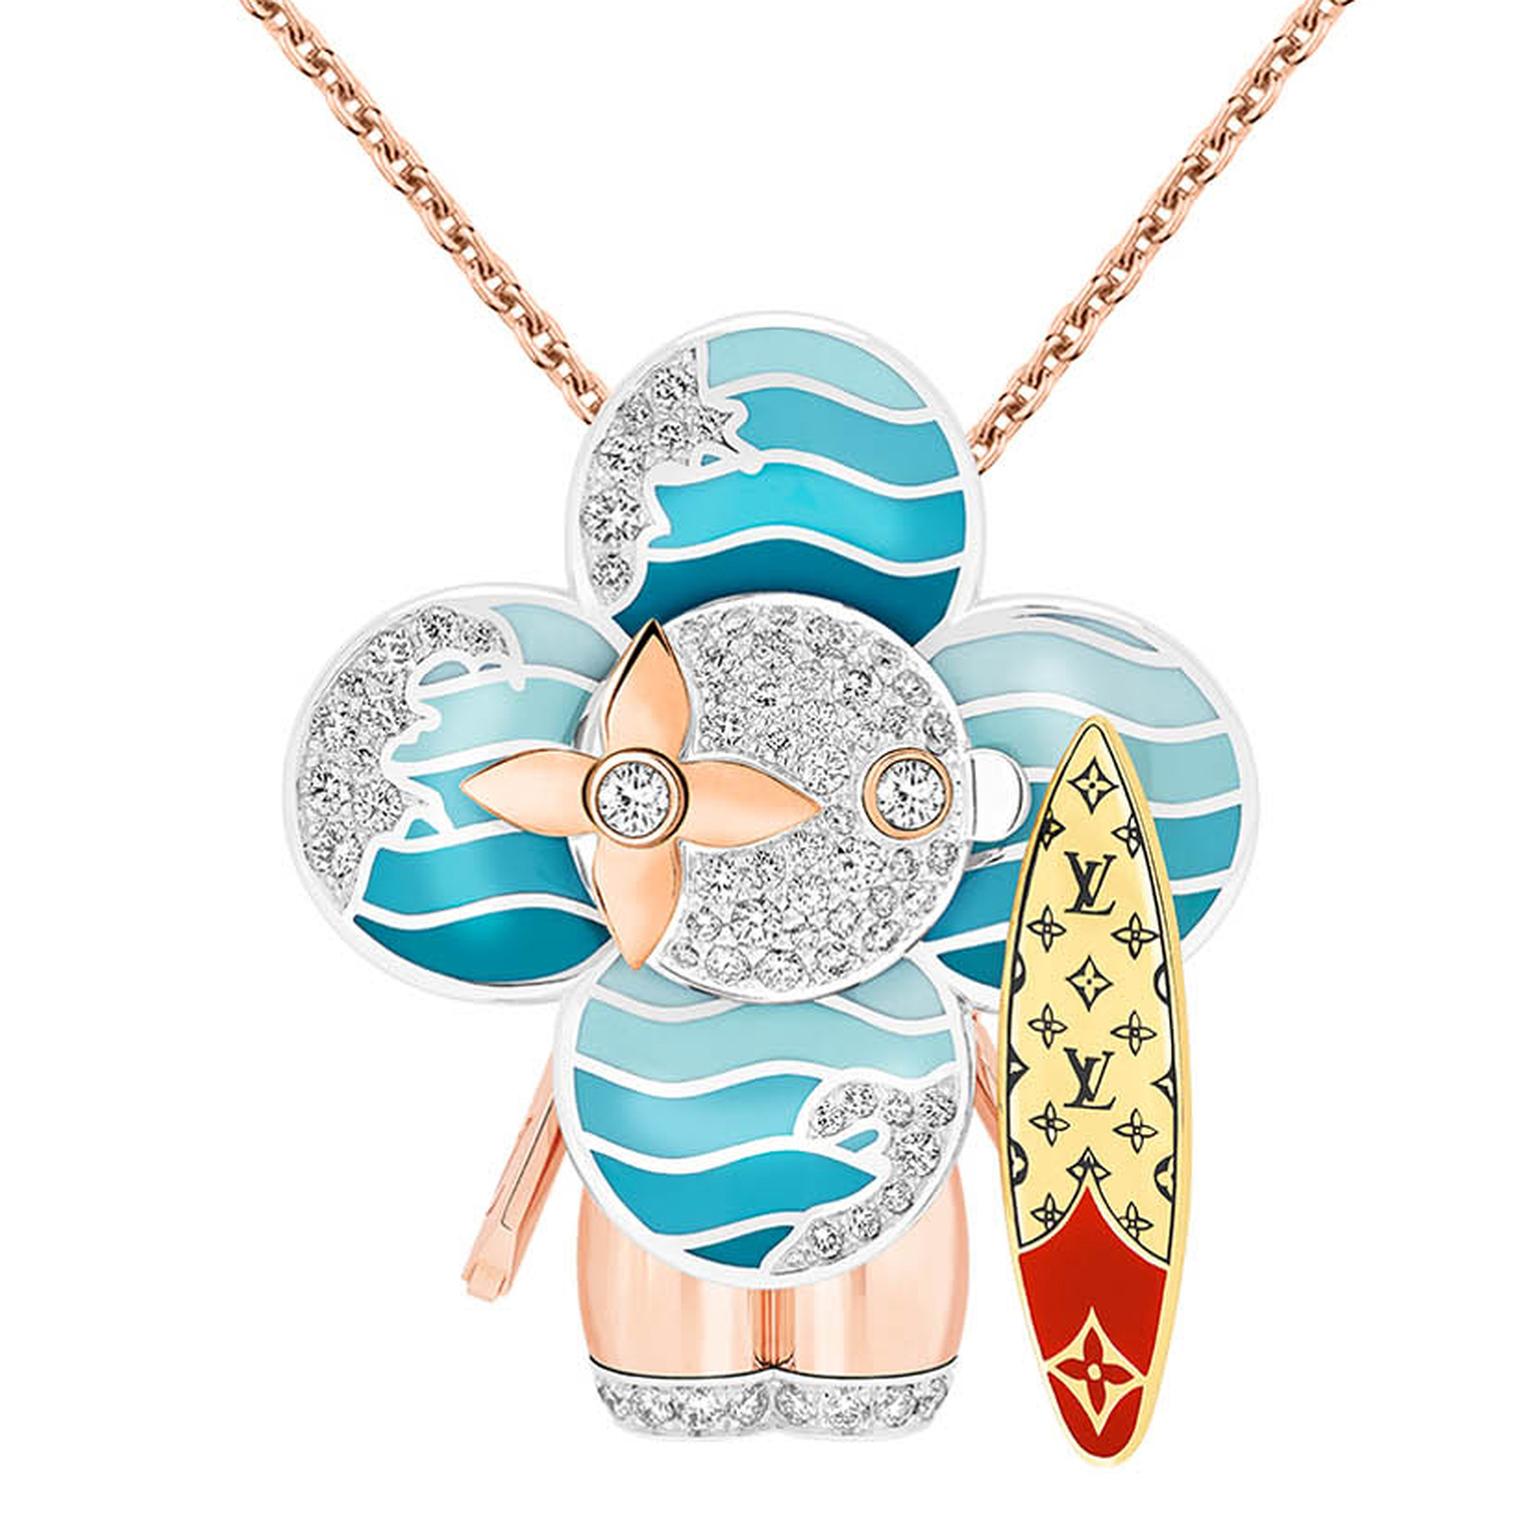 Vivienne Surfer pendant by Louis Vuitton zoomed in